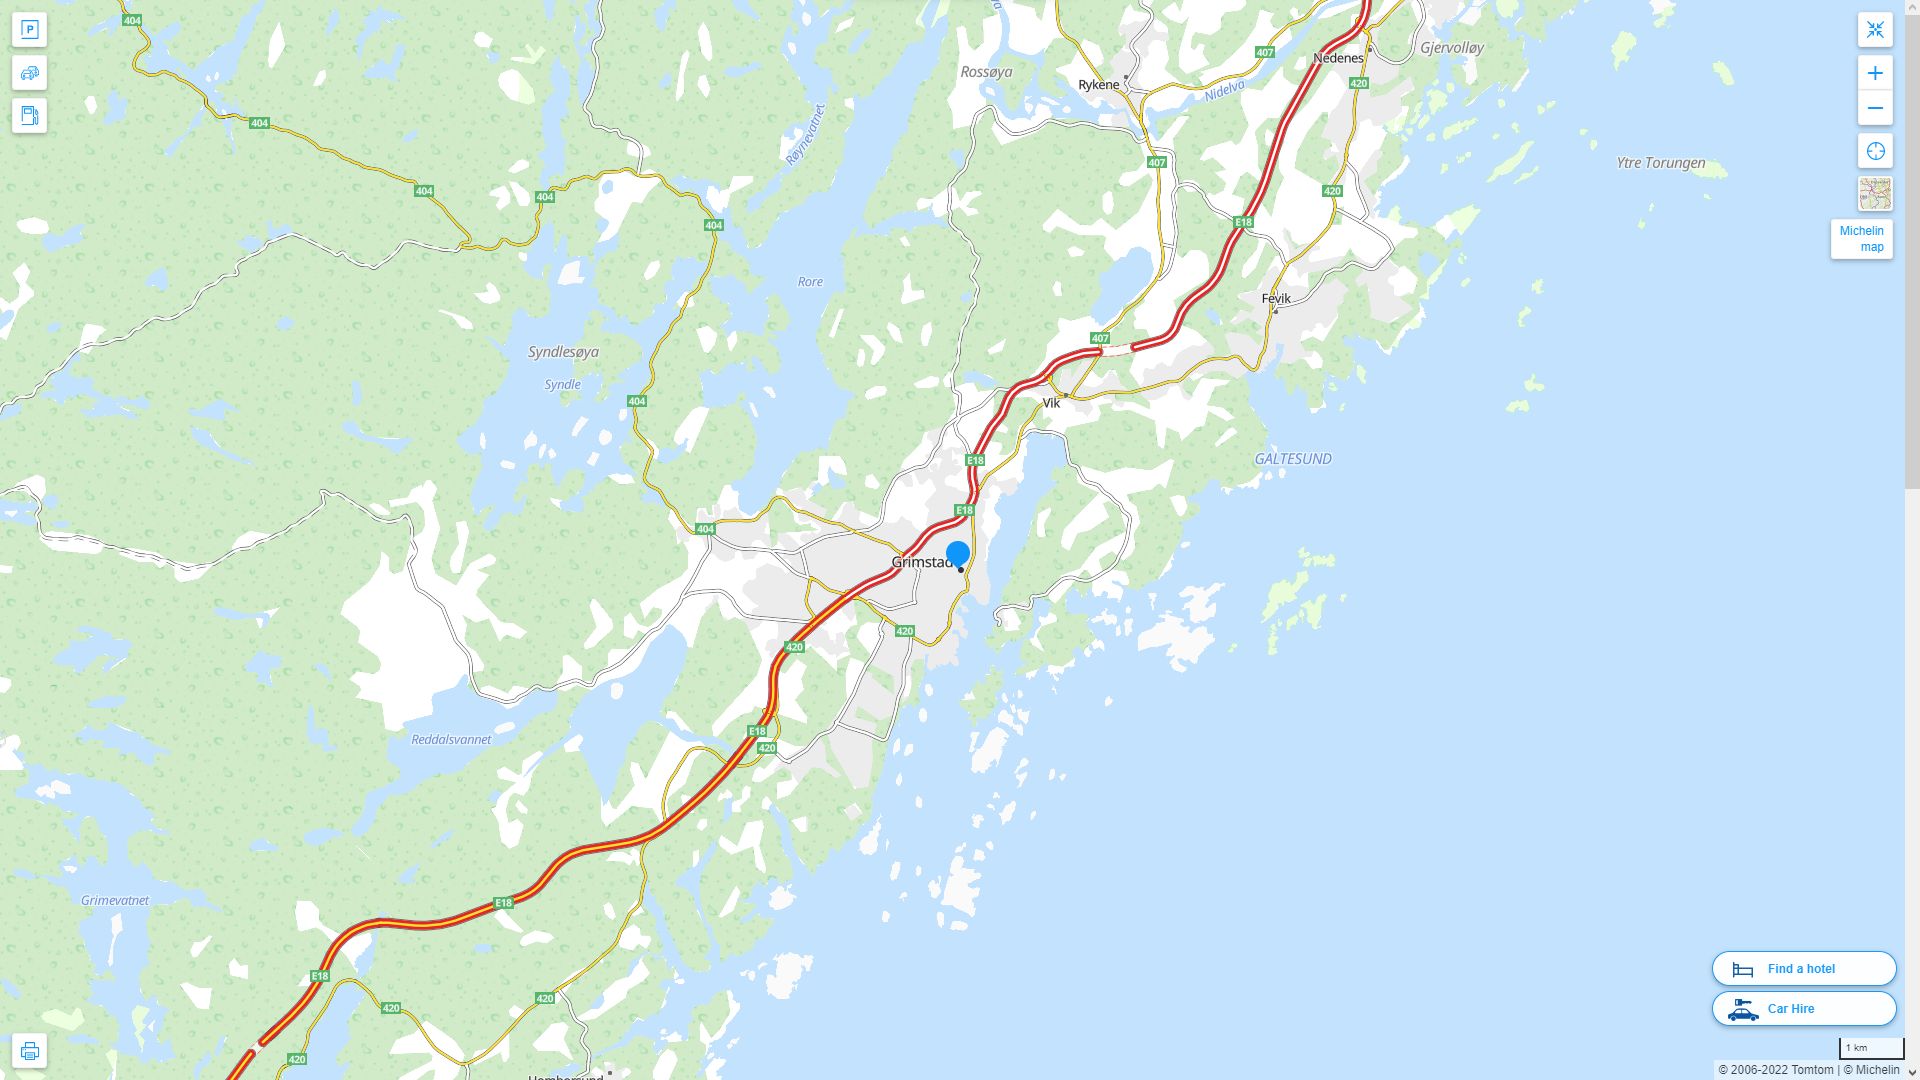 Grimstad Highway and Road Map